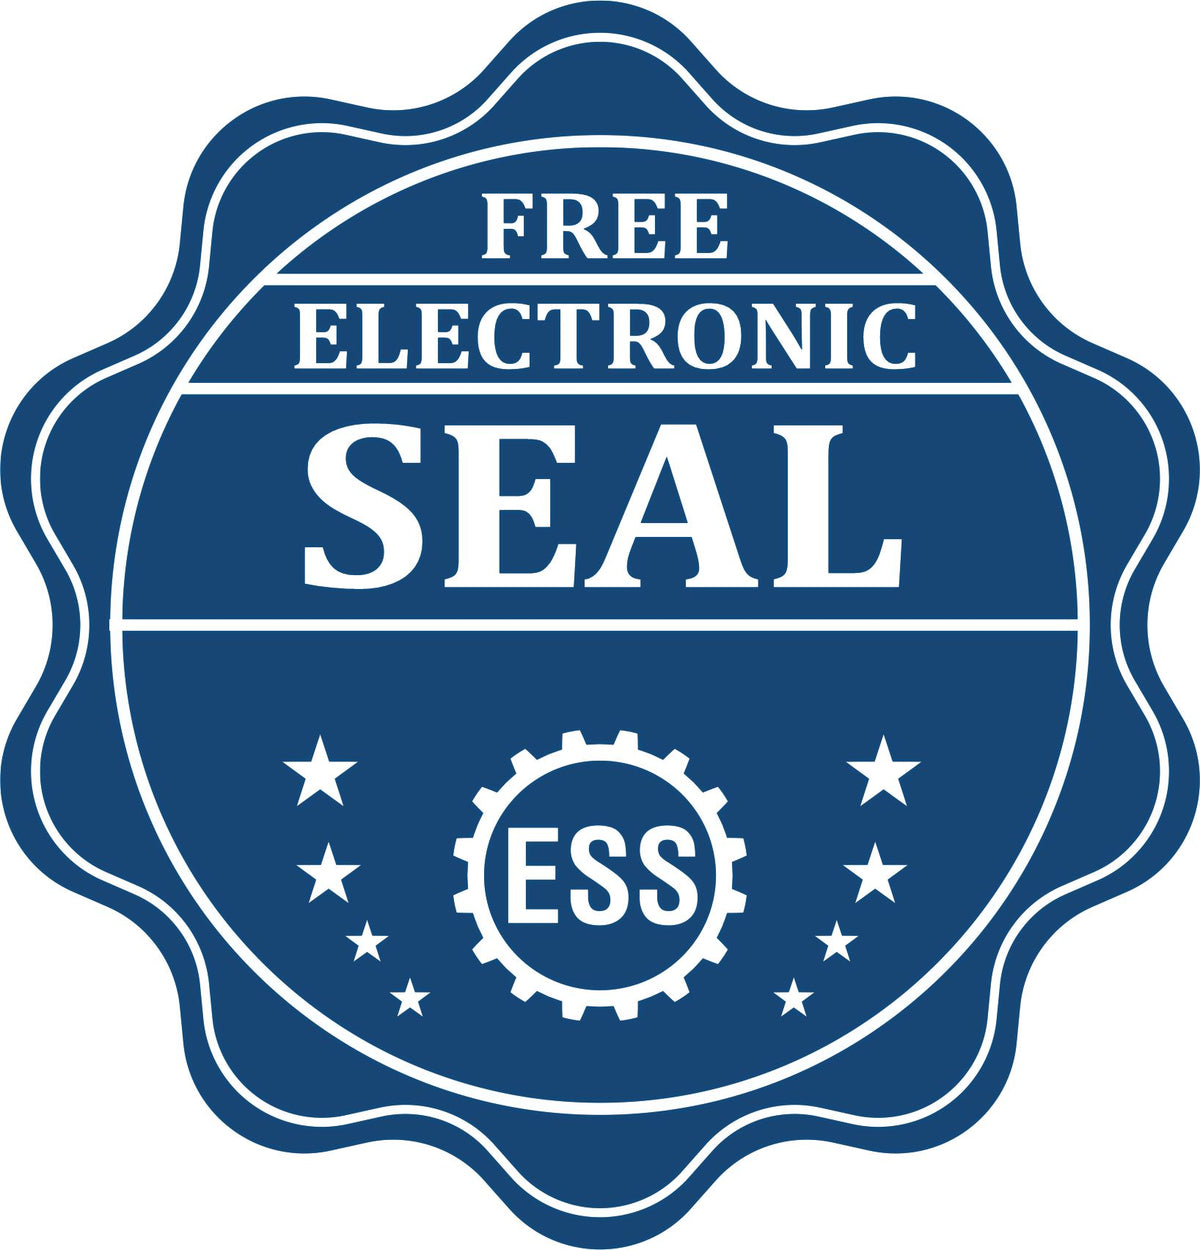 A badge showing a free electronic seal for the State of Montana Extended Long Reach Geologist Seal with stars and the ESS gear on the emblem.